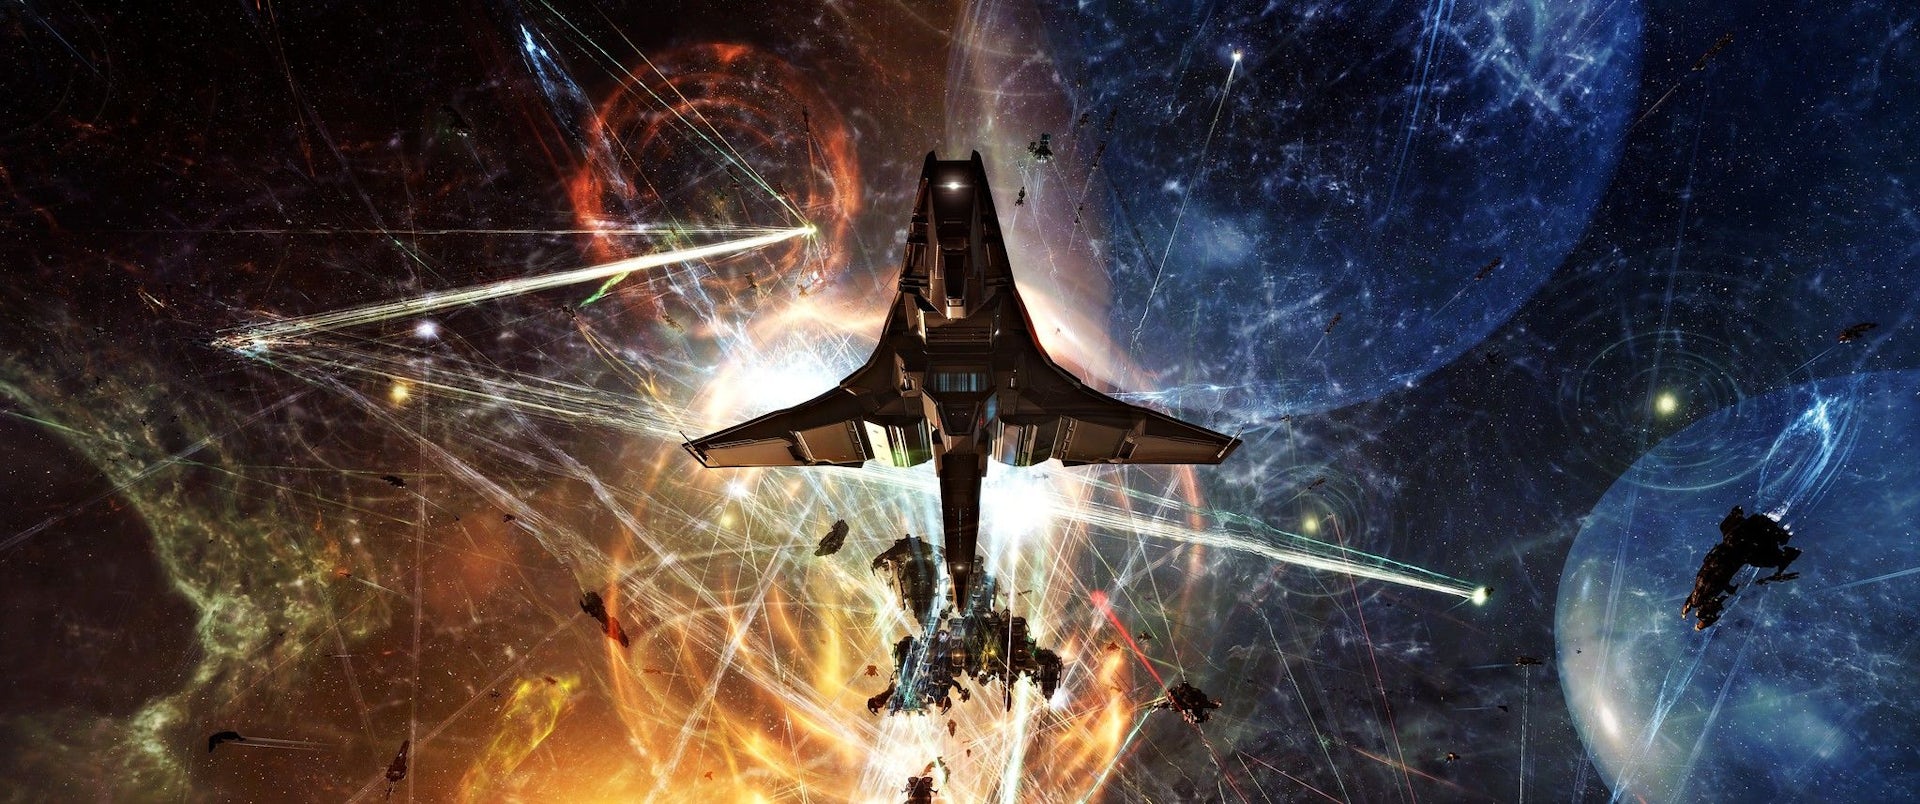 Produce an essay on your dream future for EVE Online for $20